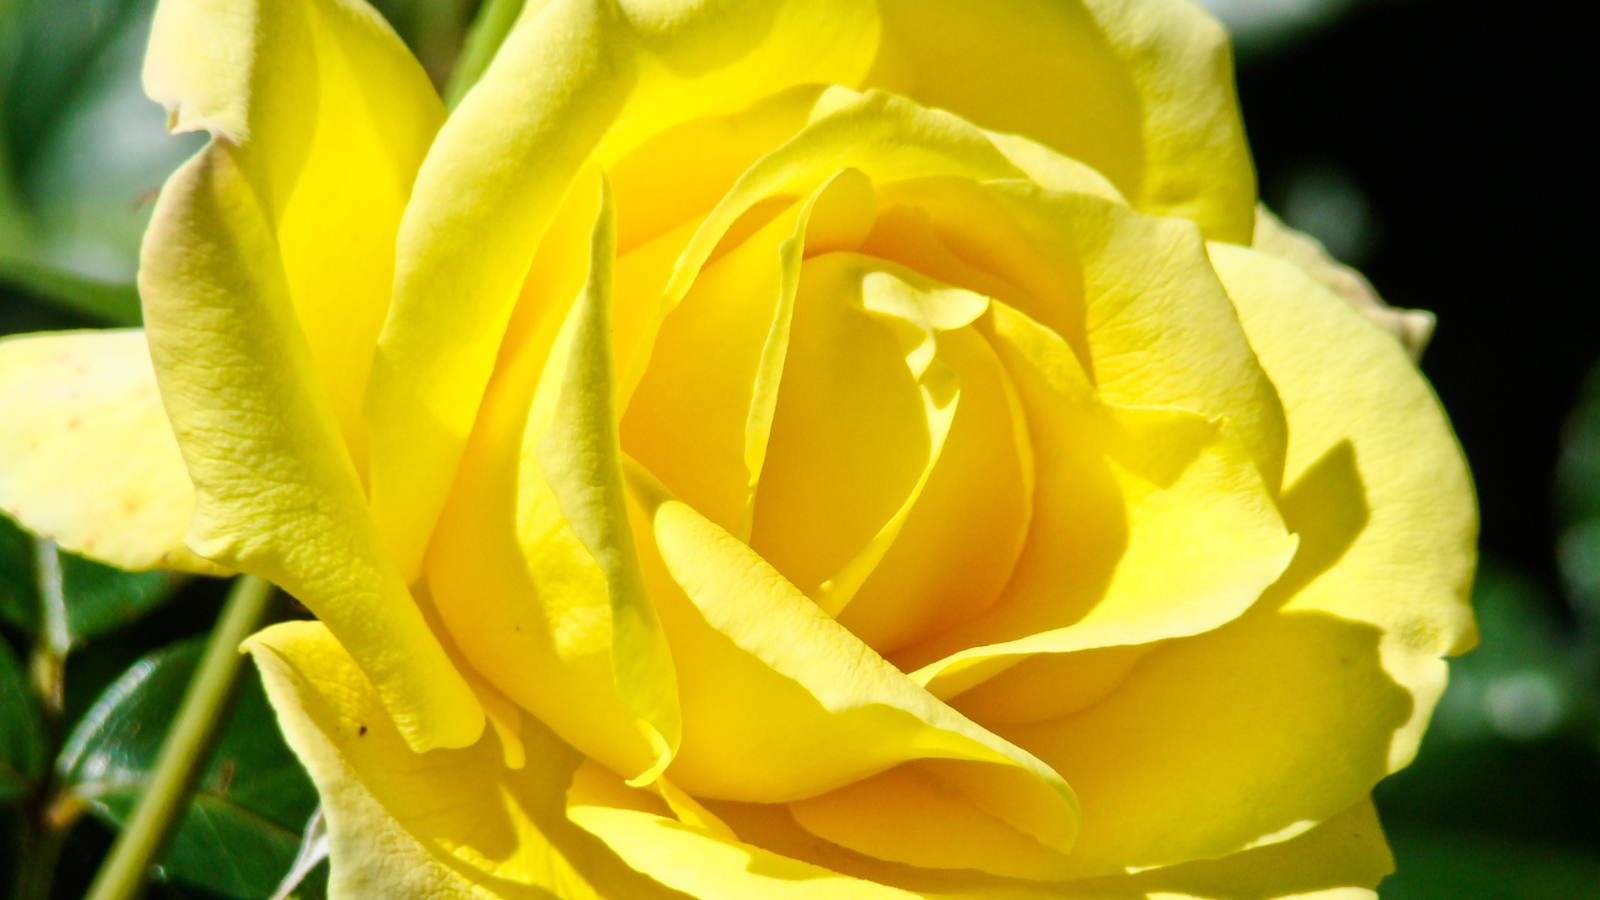 A close-up of a yellow 'Radiant Perfume' rose basking in sunlight, its petals vibrant and glowing with warmth, capturing the essence of summer in a single bloom.